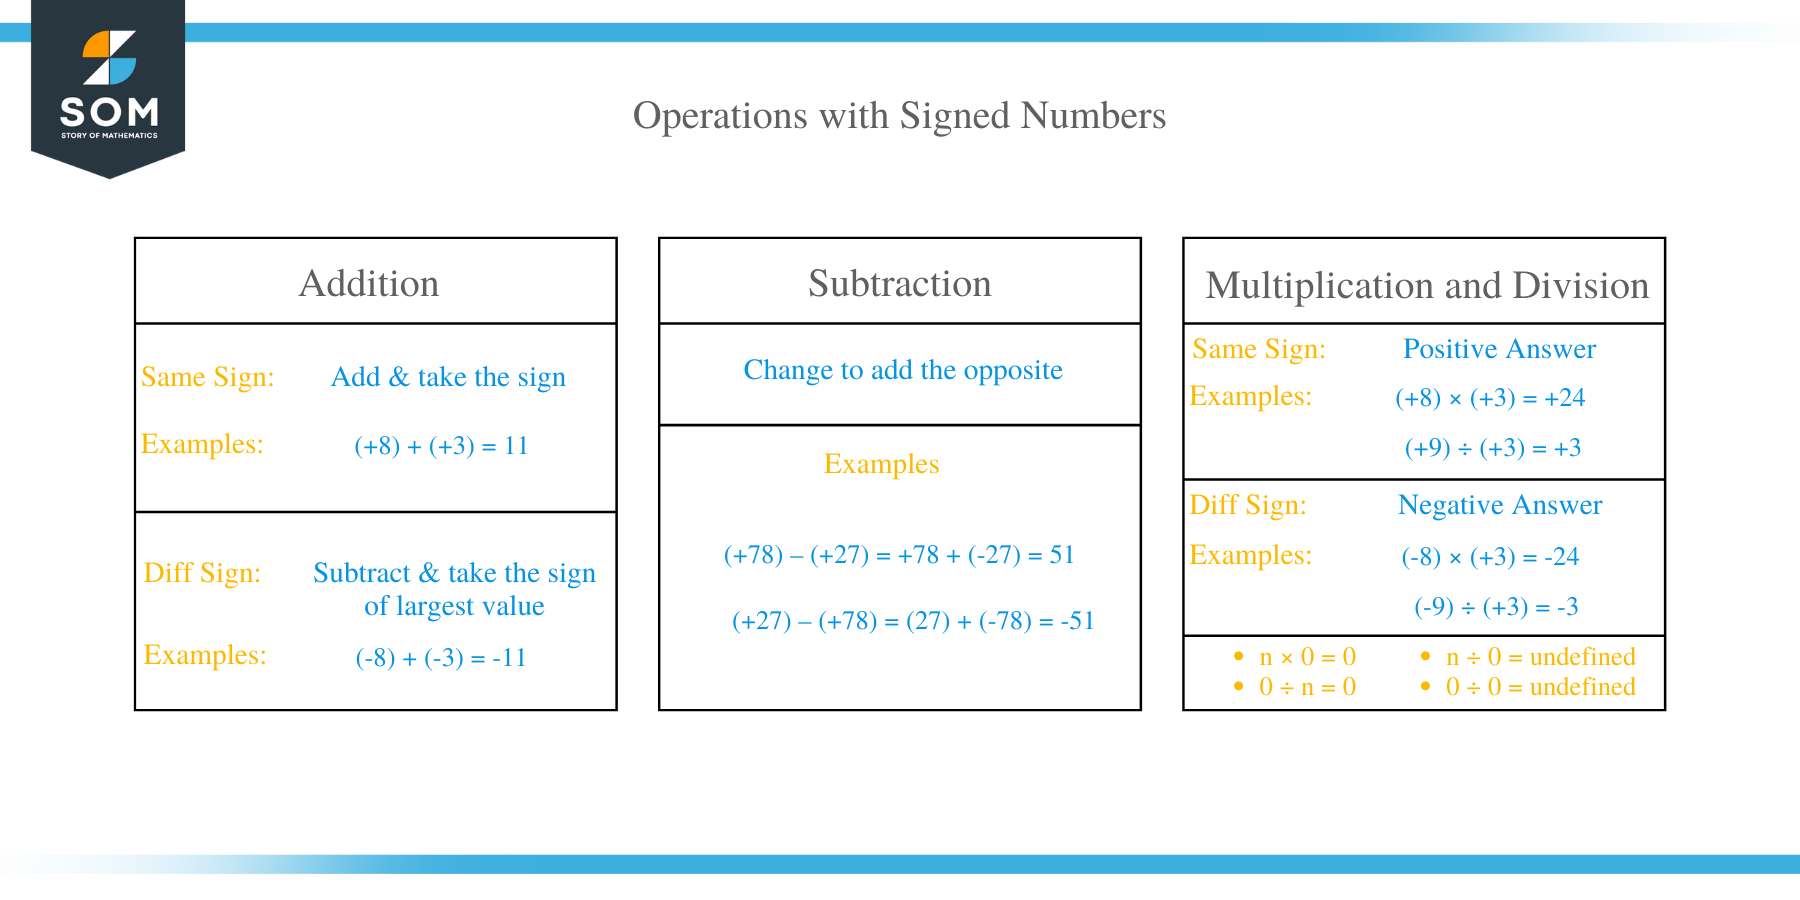 Operations with Signed Numbers